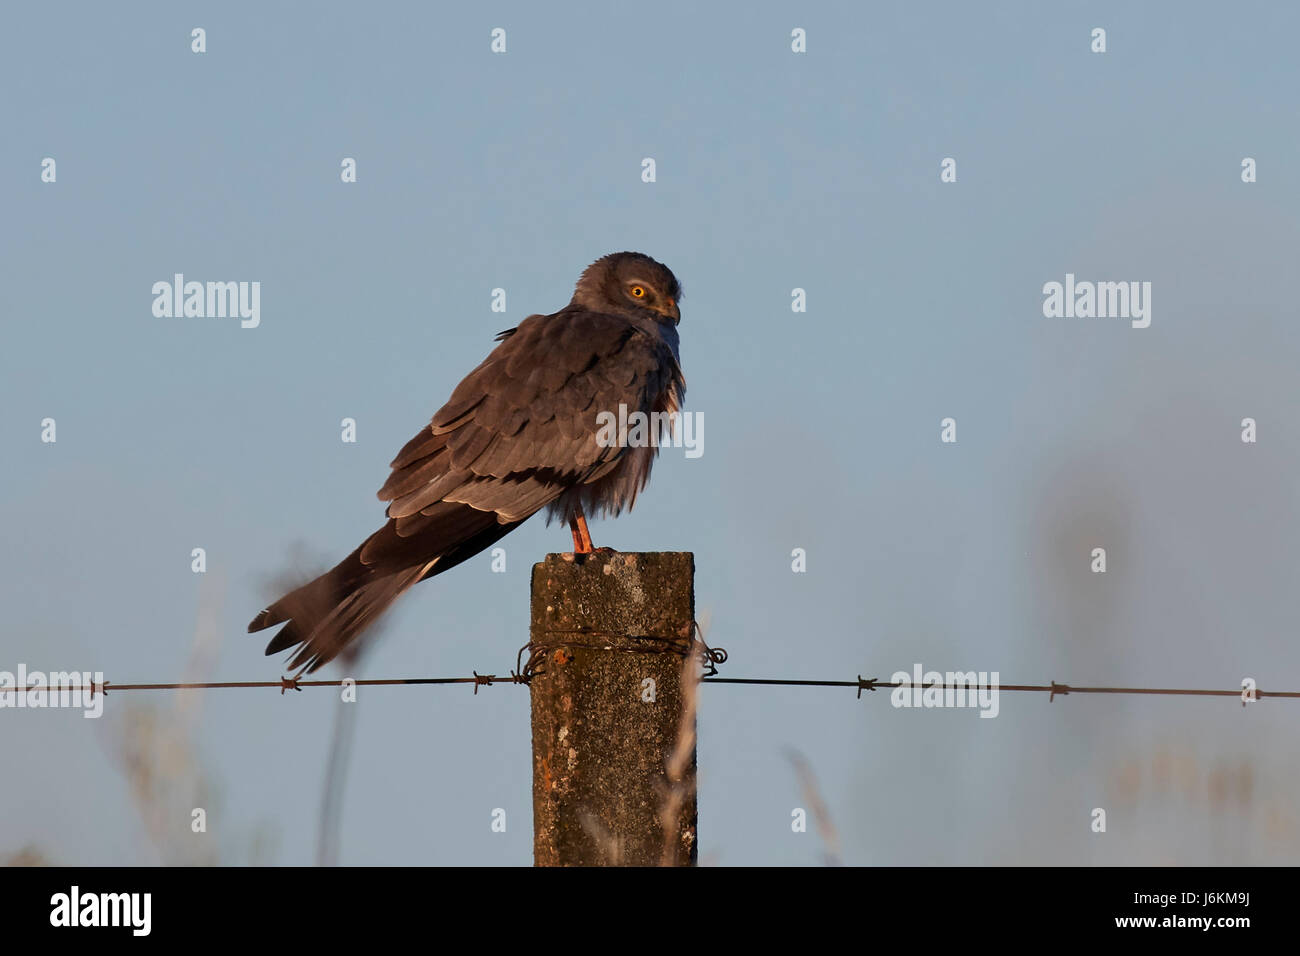 Montagus harrier resting on a pole in erly morning light Stock Photo